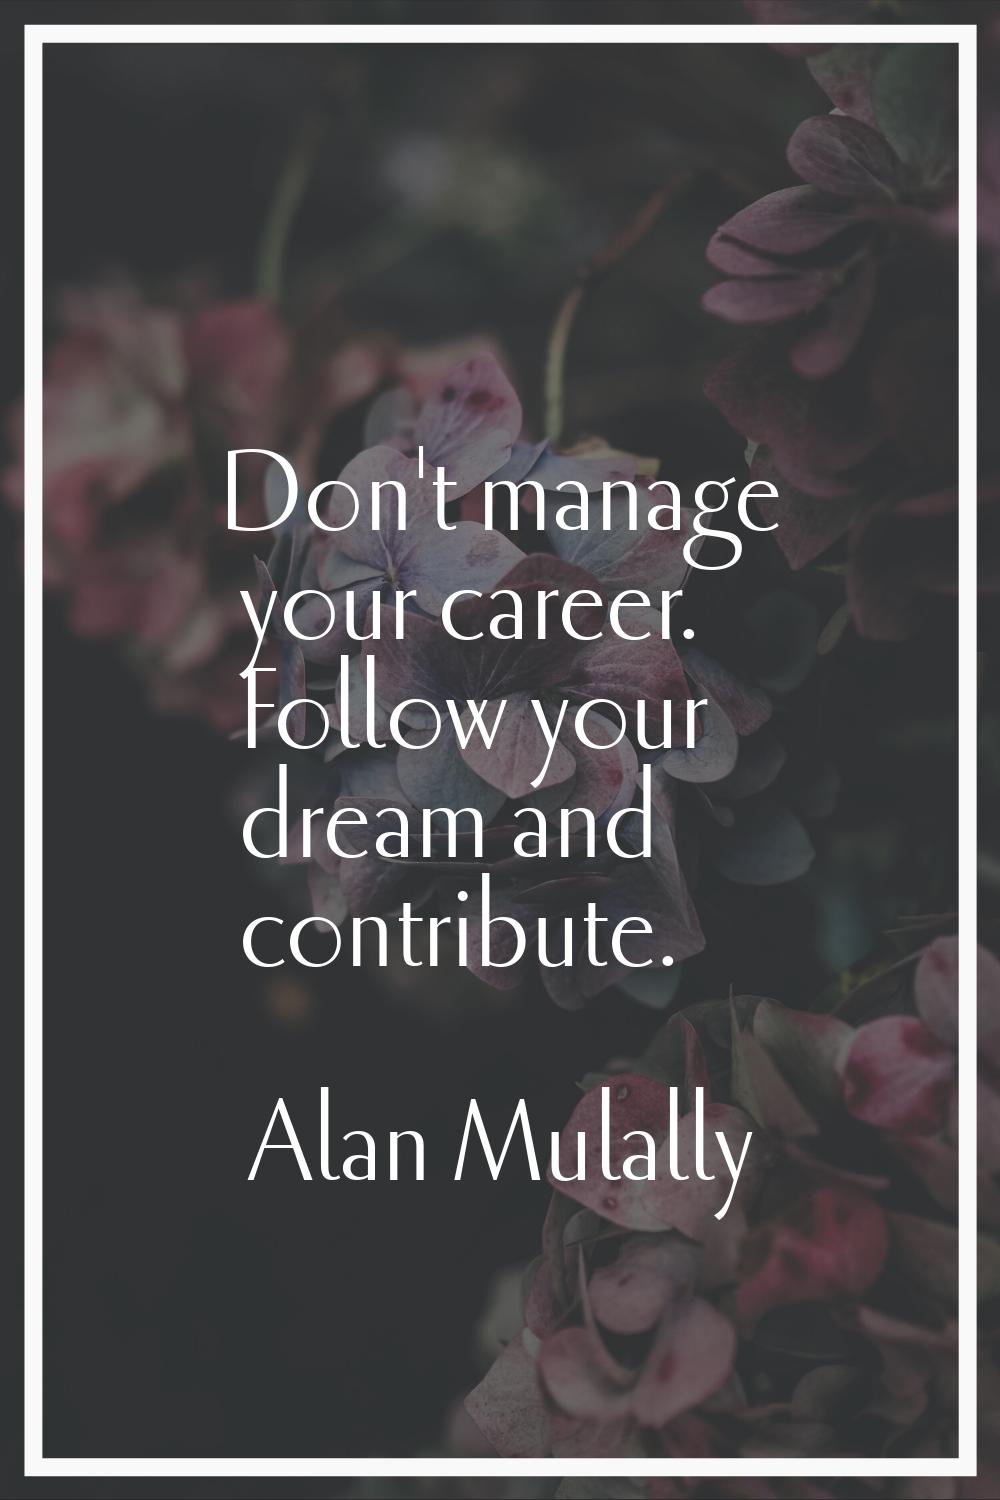 Don't manage your career. Follow your dream and contribute.